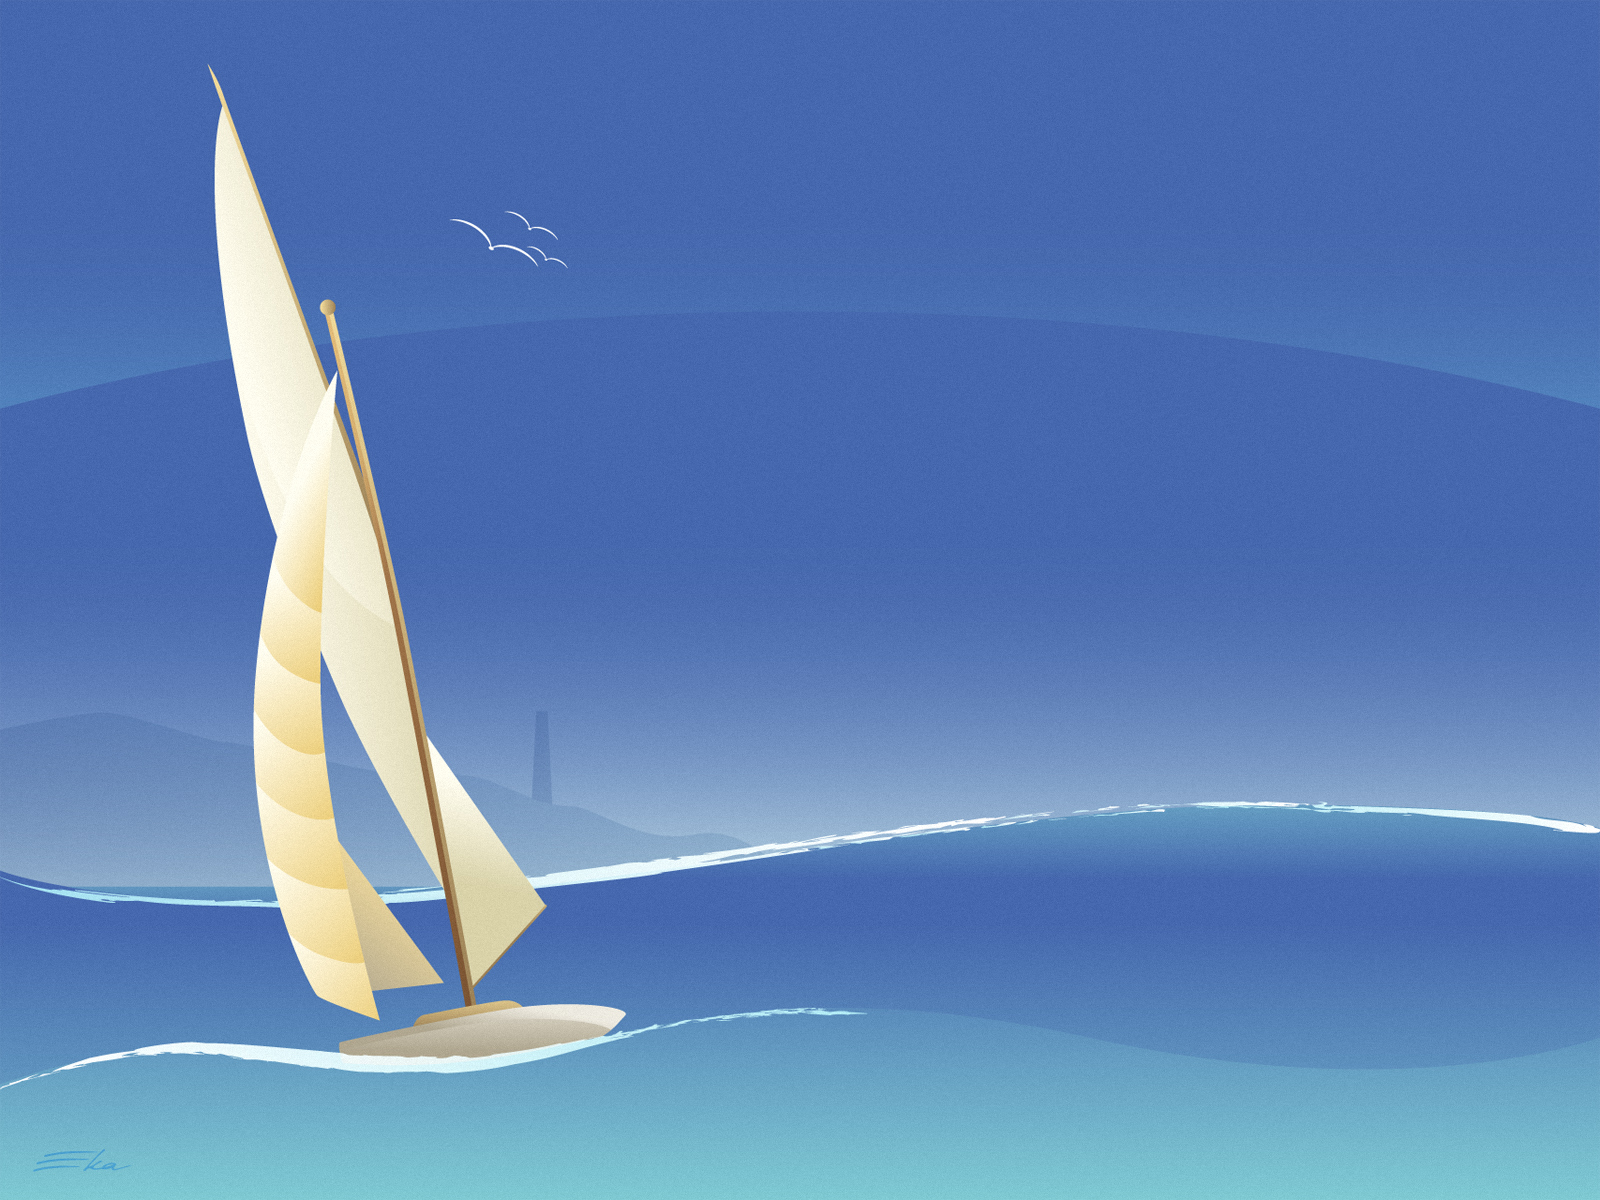  and Wallpaper   Sailing in Blue by ekster   Always Free Download